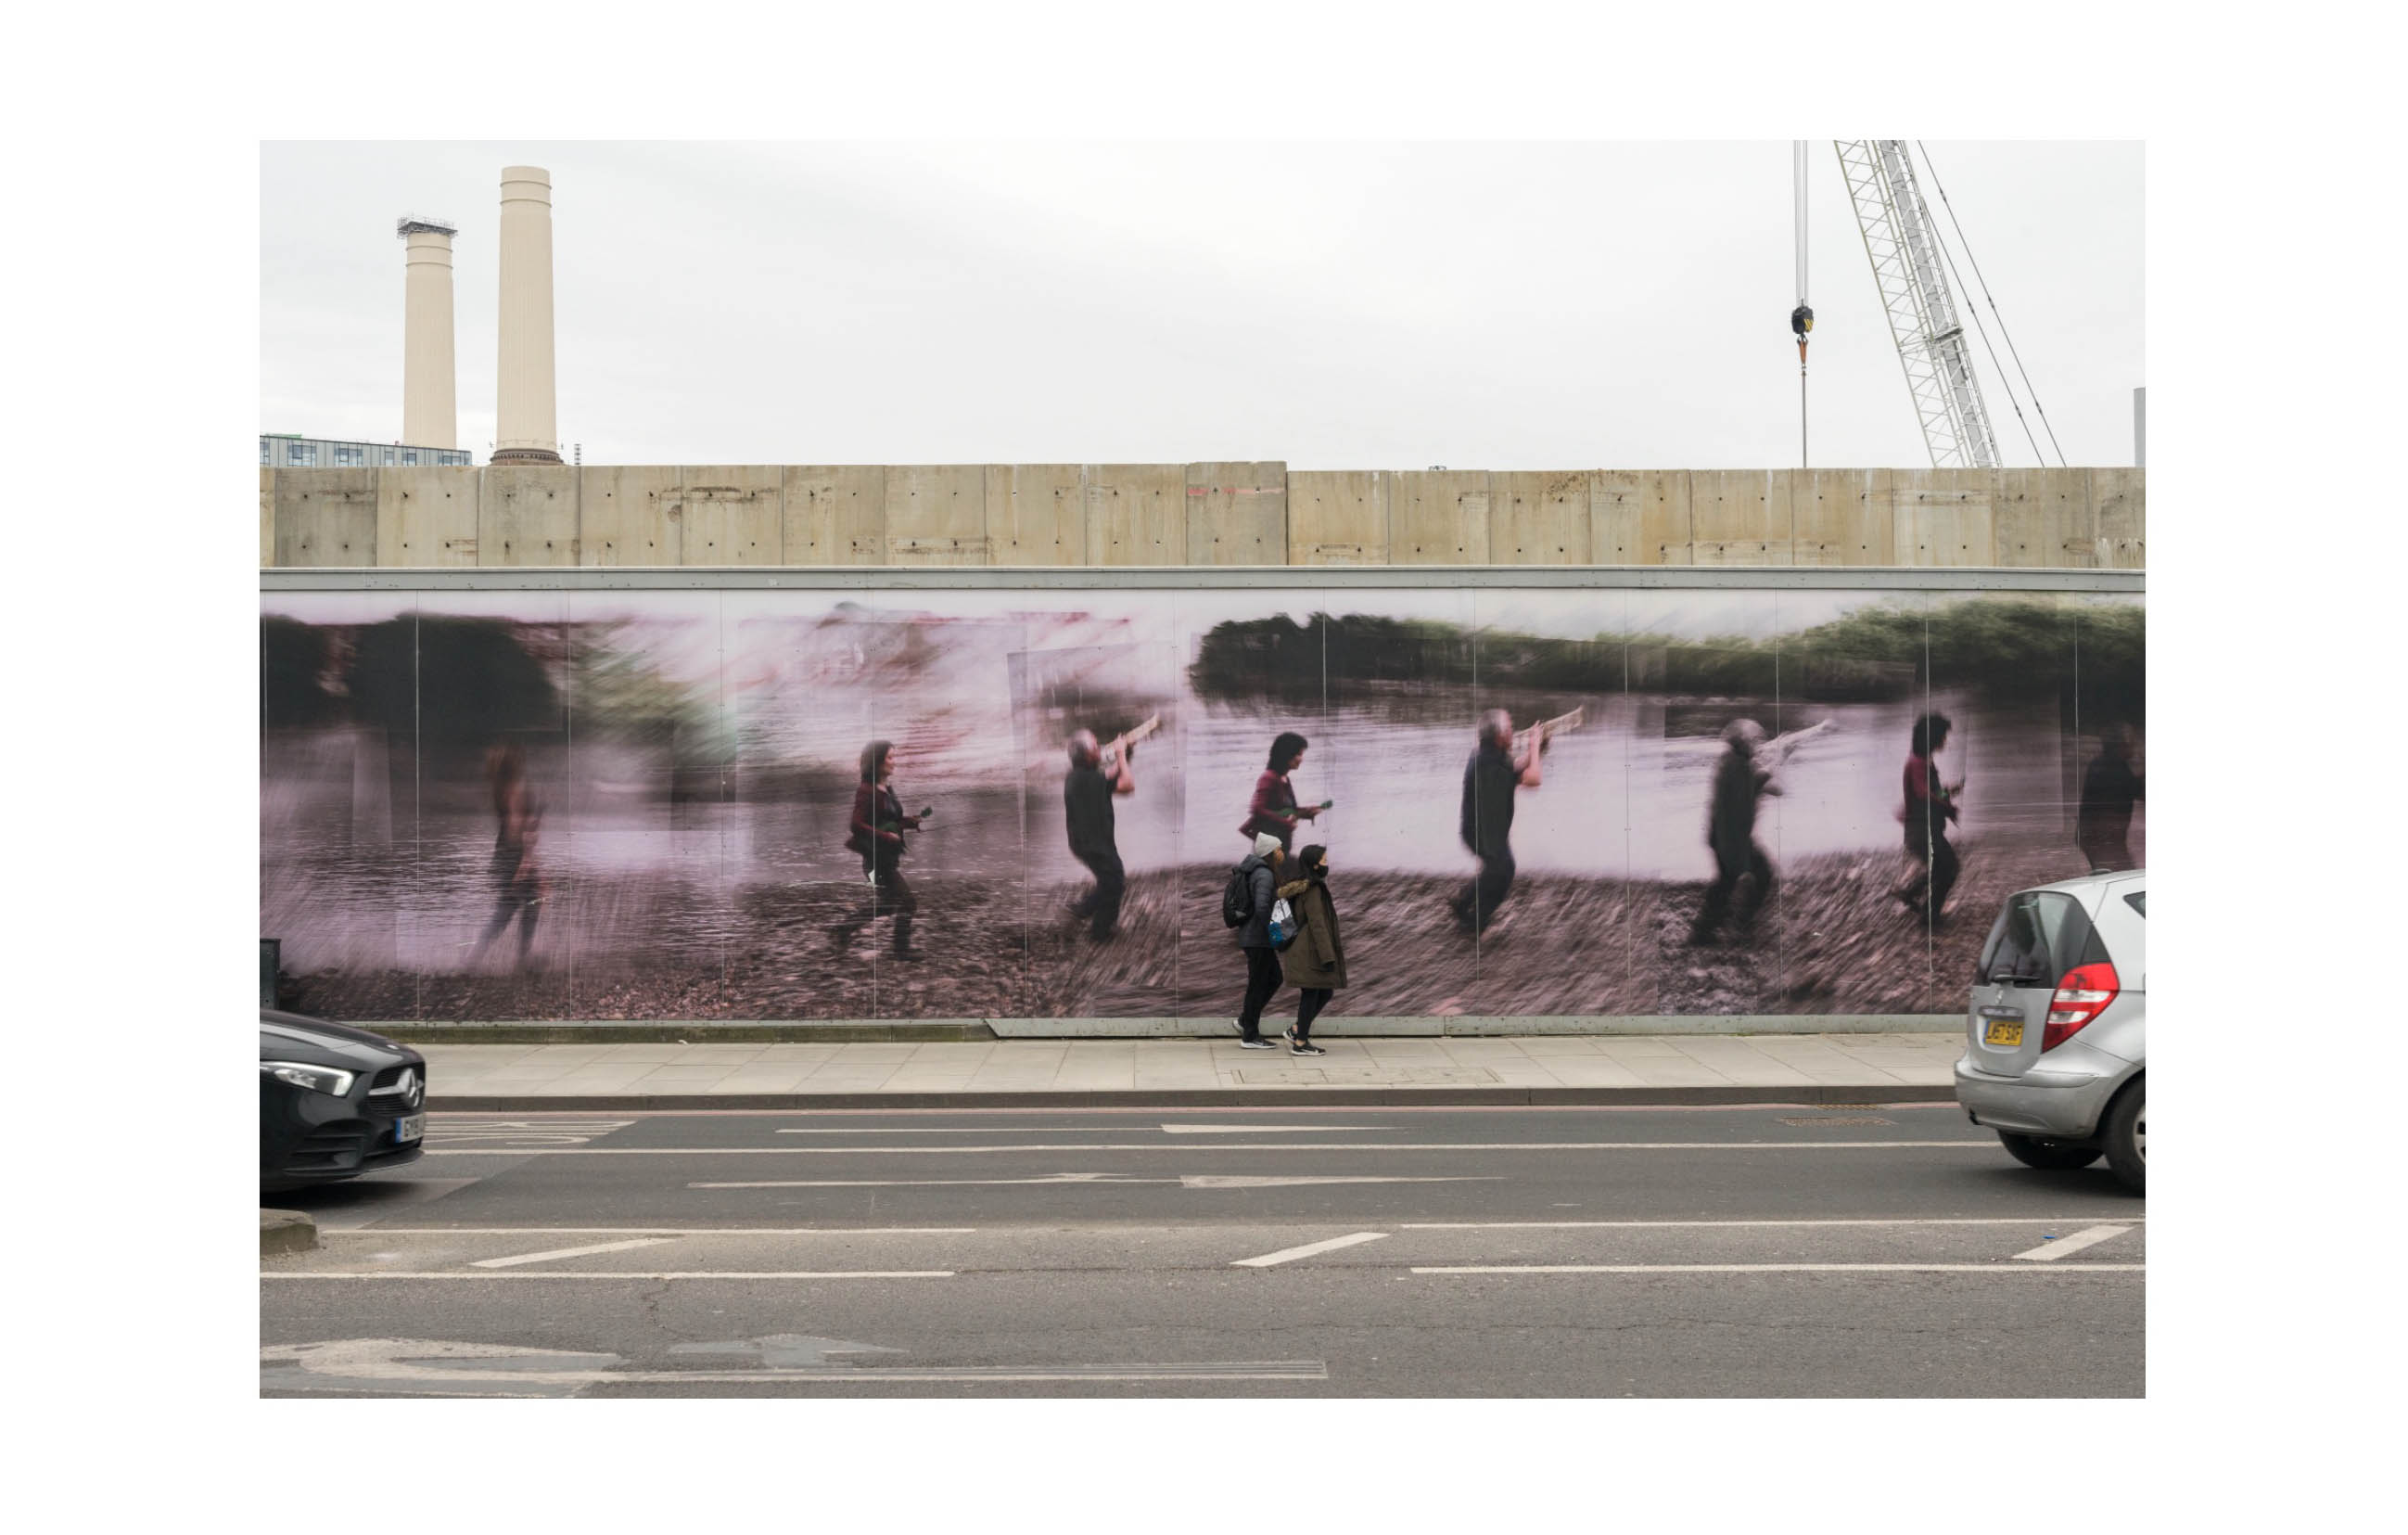 a long hoarding shows an artistic photo collage of blurred figures playing musical instruments alongside the Thames; in real life cars and people pass by in front